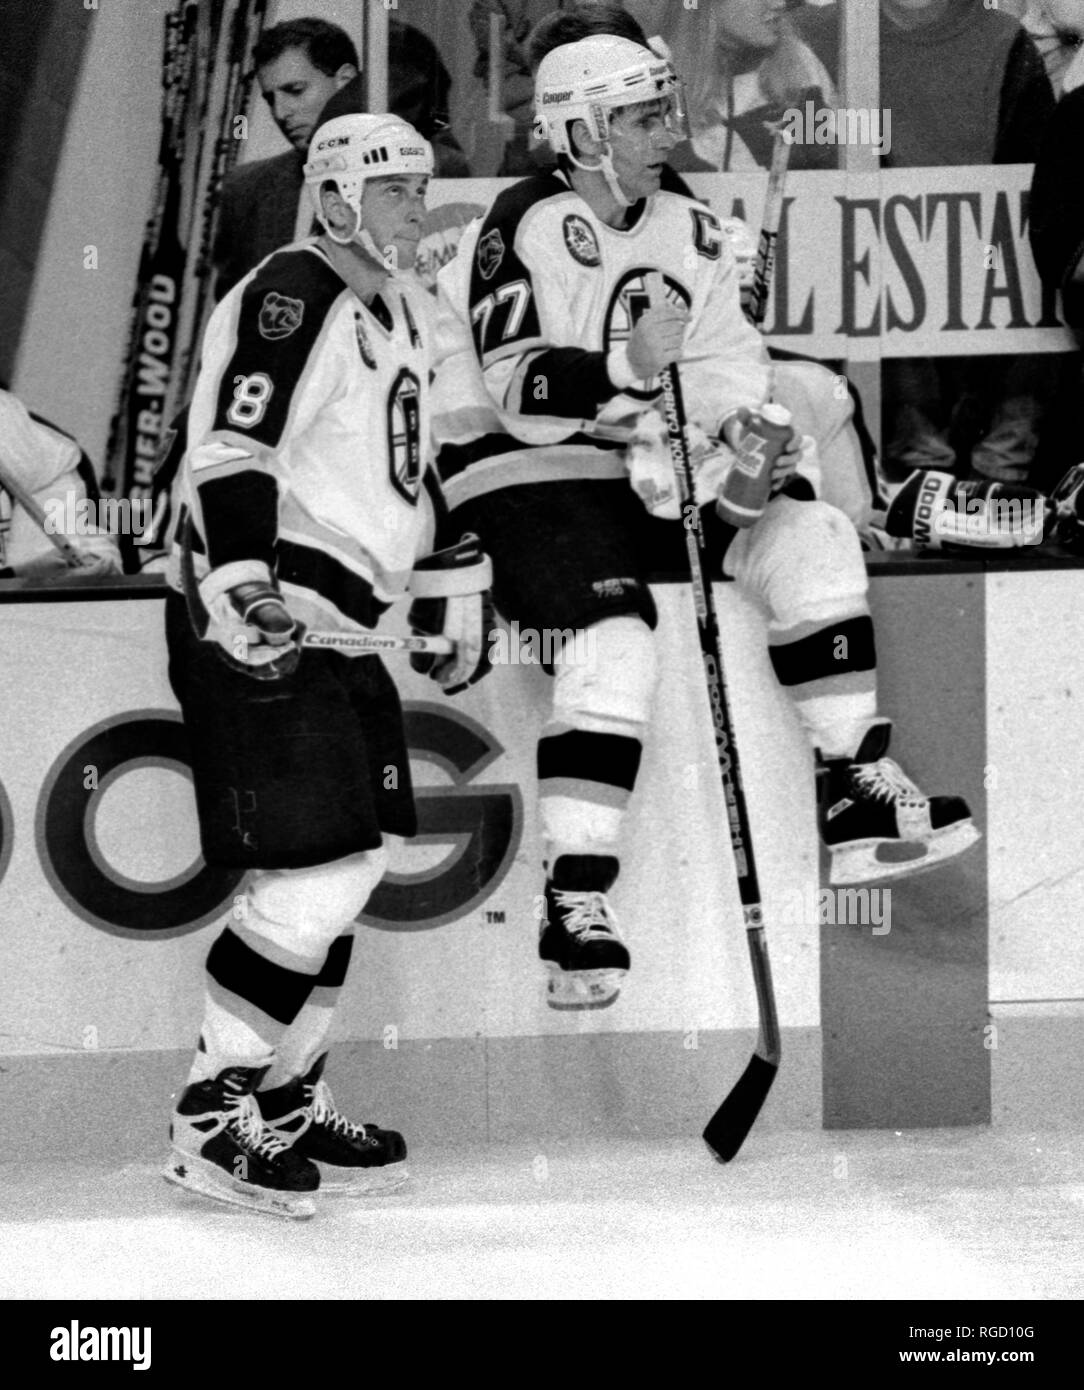 Boston Bruins Cam Neely (left) and Ray Bourque during a break in the action against the Detroit Red Wings at the Fleet Center in Boston Ma USA Nov. 2 ,1995 photo by bill belknap Stock Photo